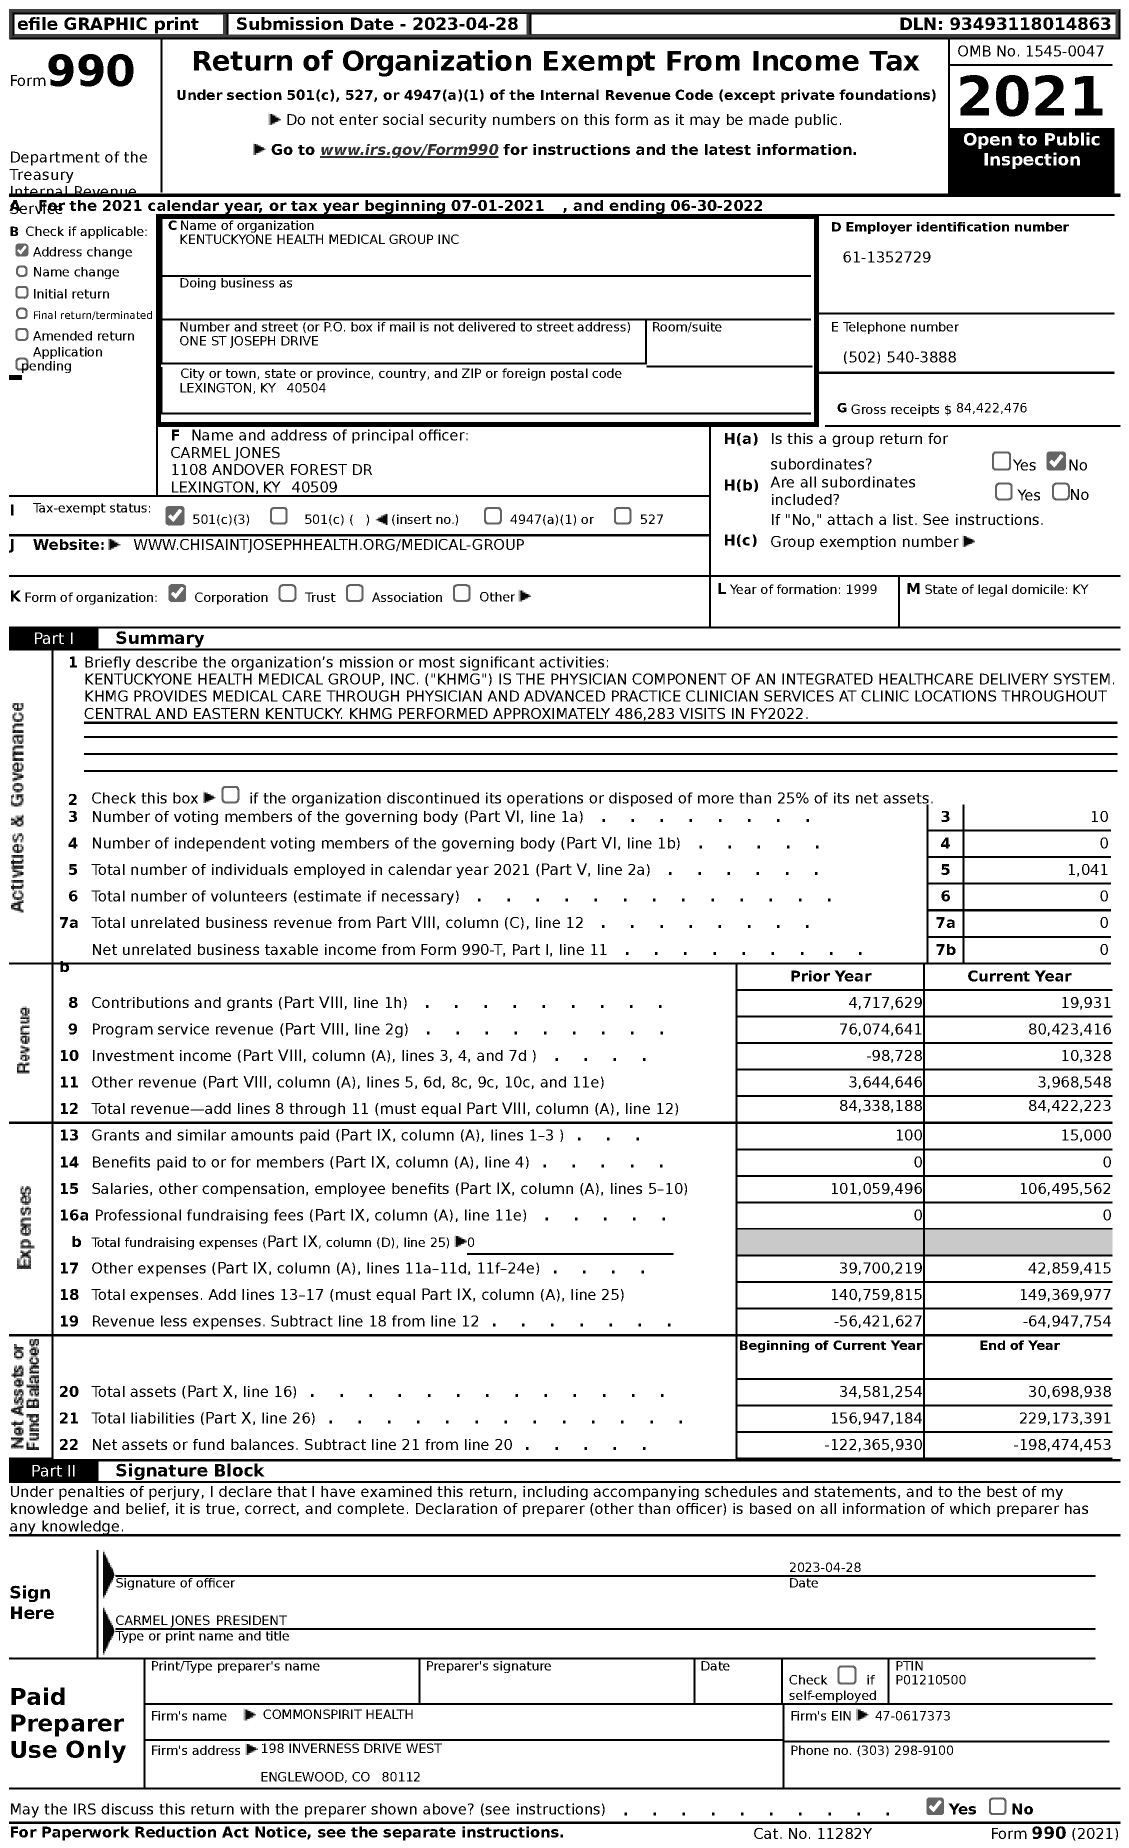 Image of first page of 2021 Form 990 for KentuckyOne Health Medical Group